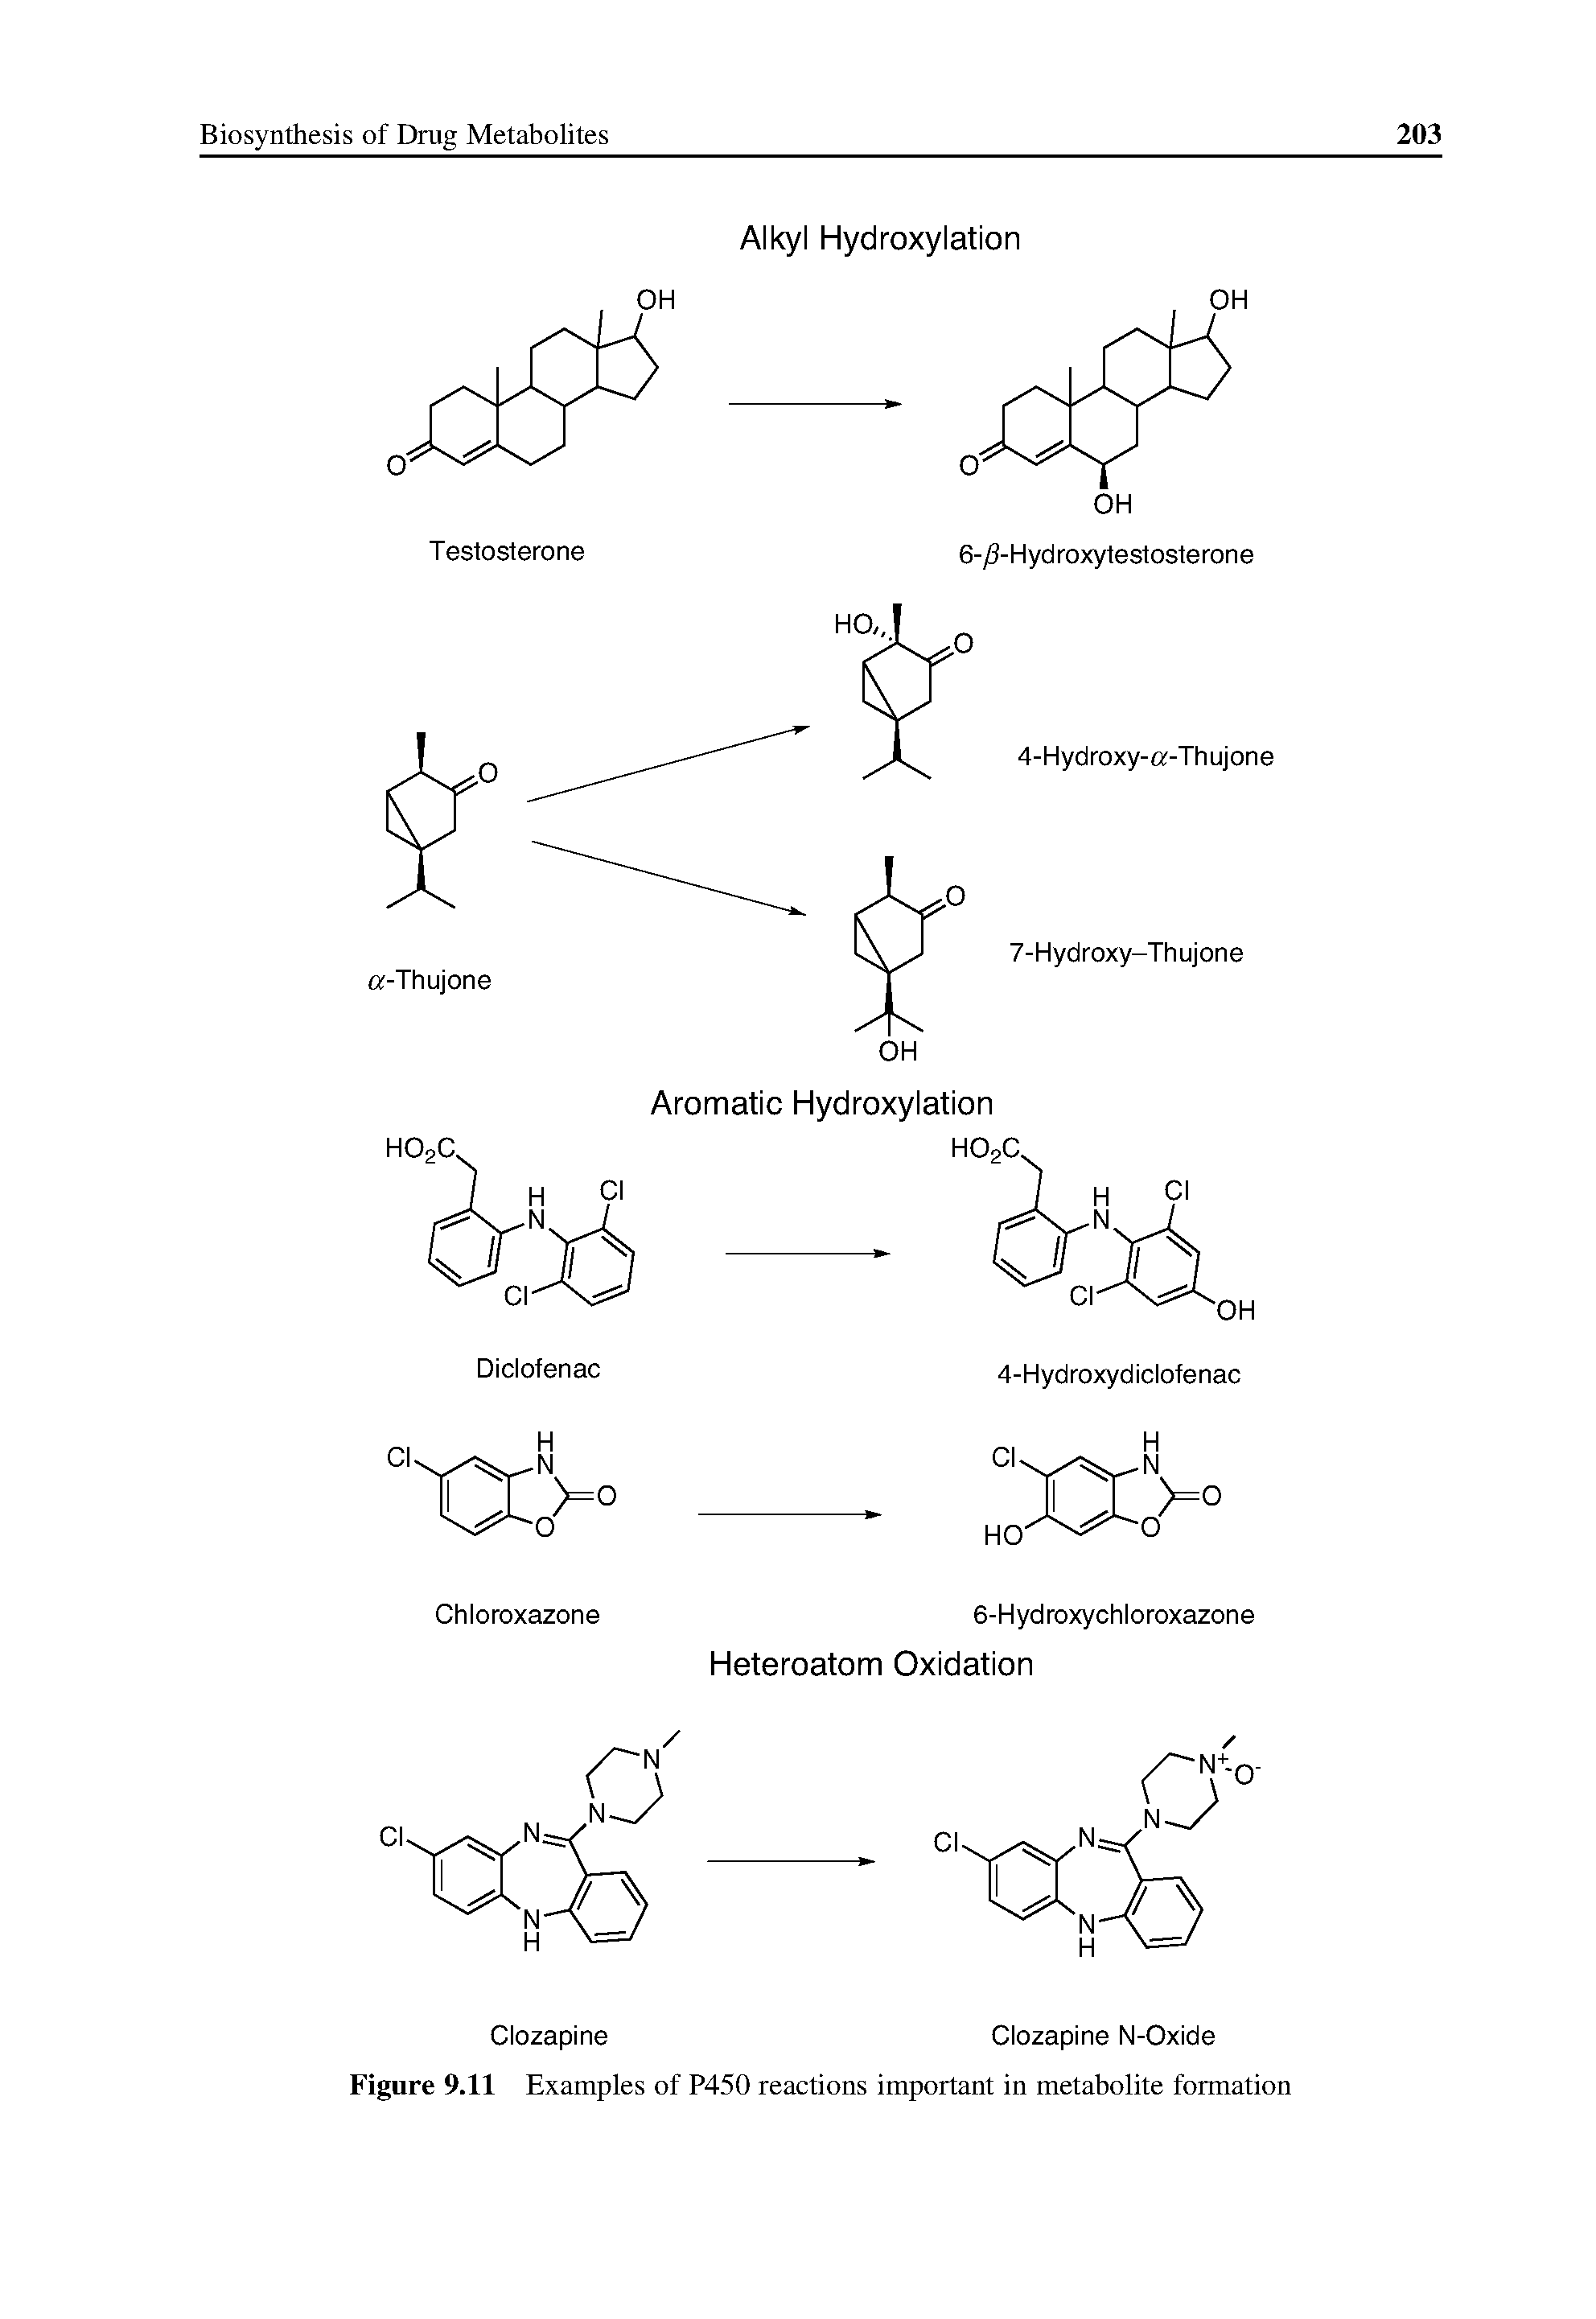 Figure 9.11 Examples of P450 reactions important in metabolite formation...